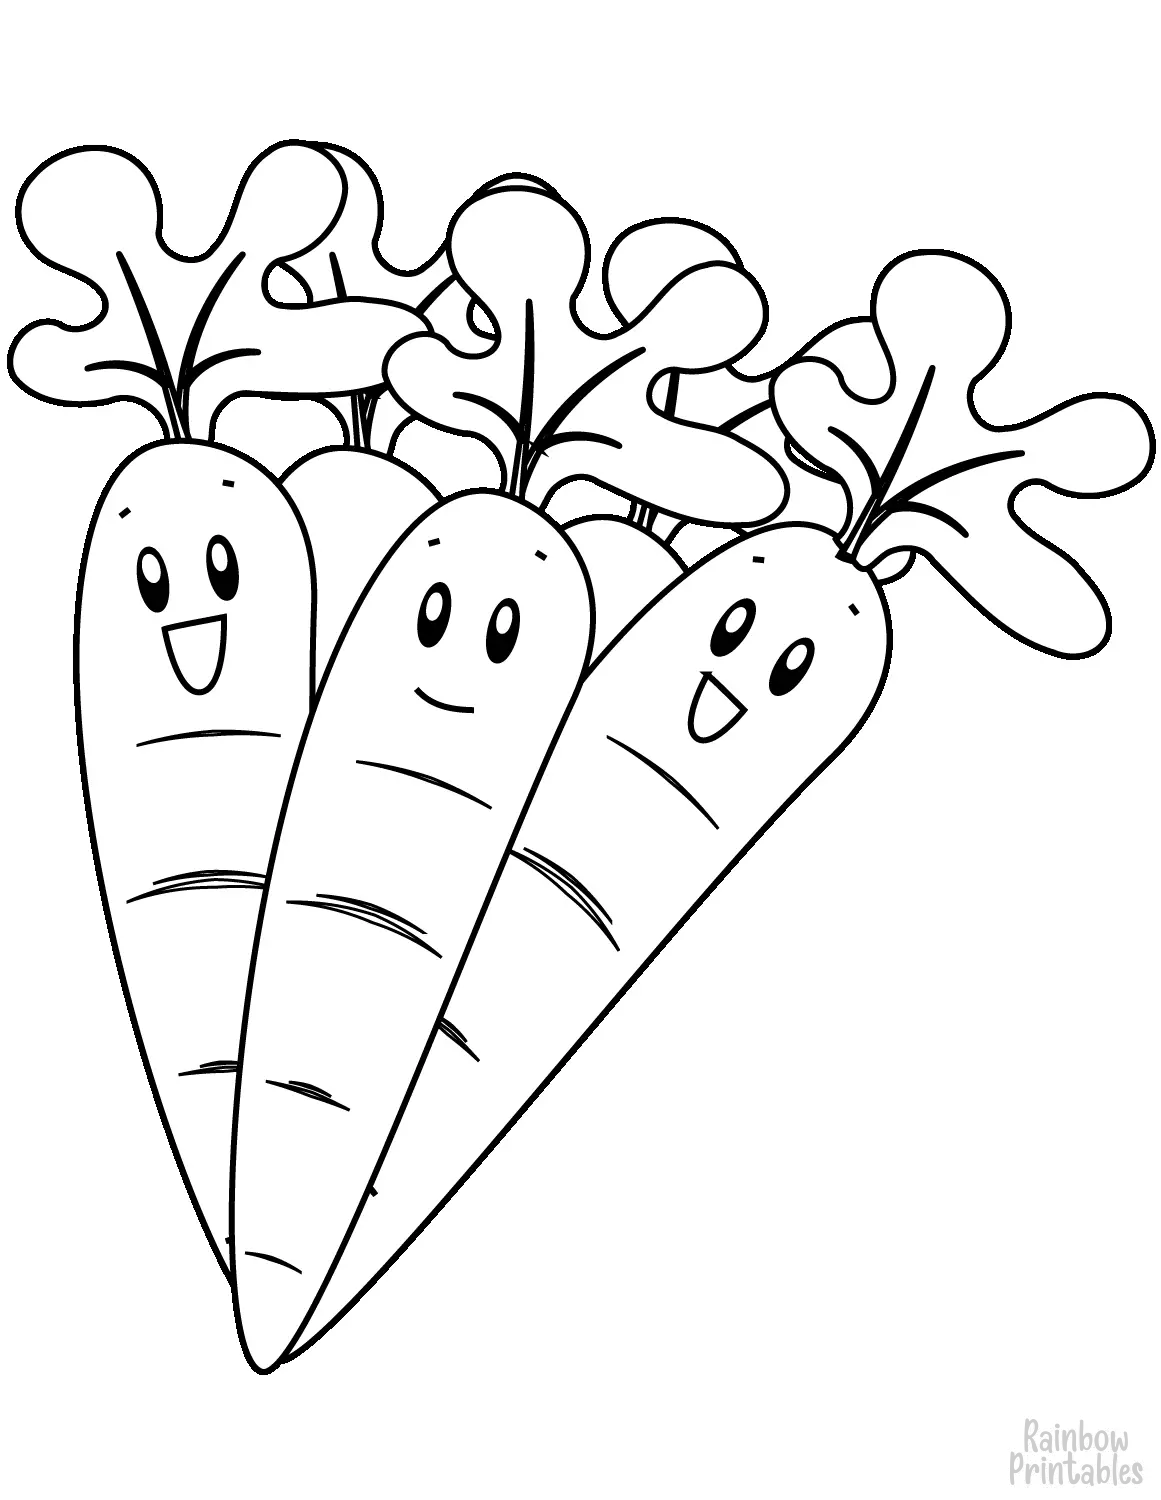 Free Coloring Pages About Food